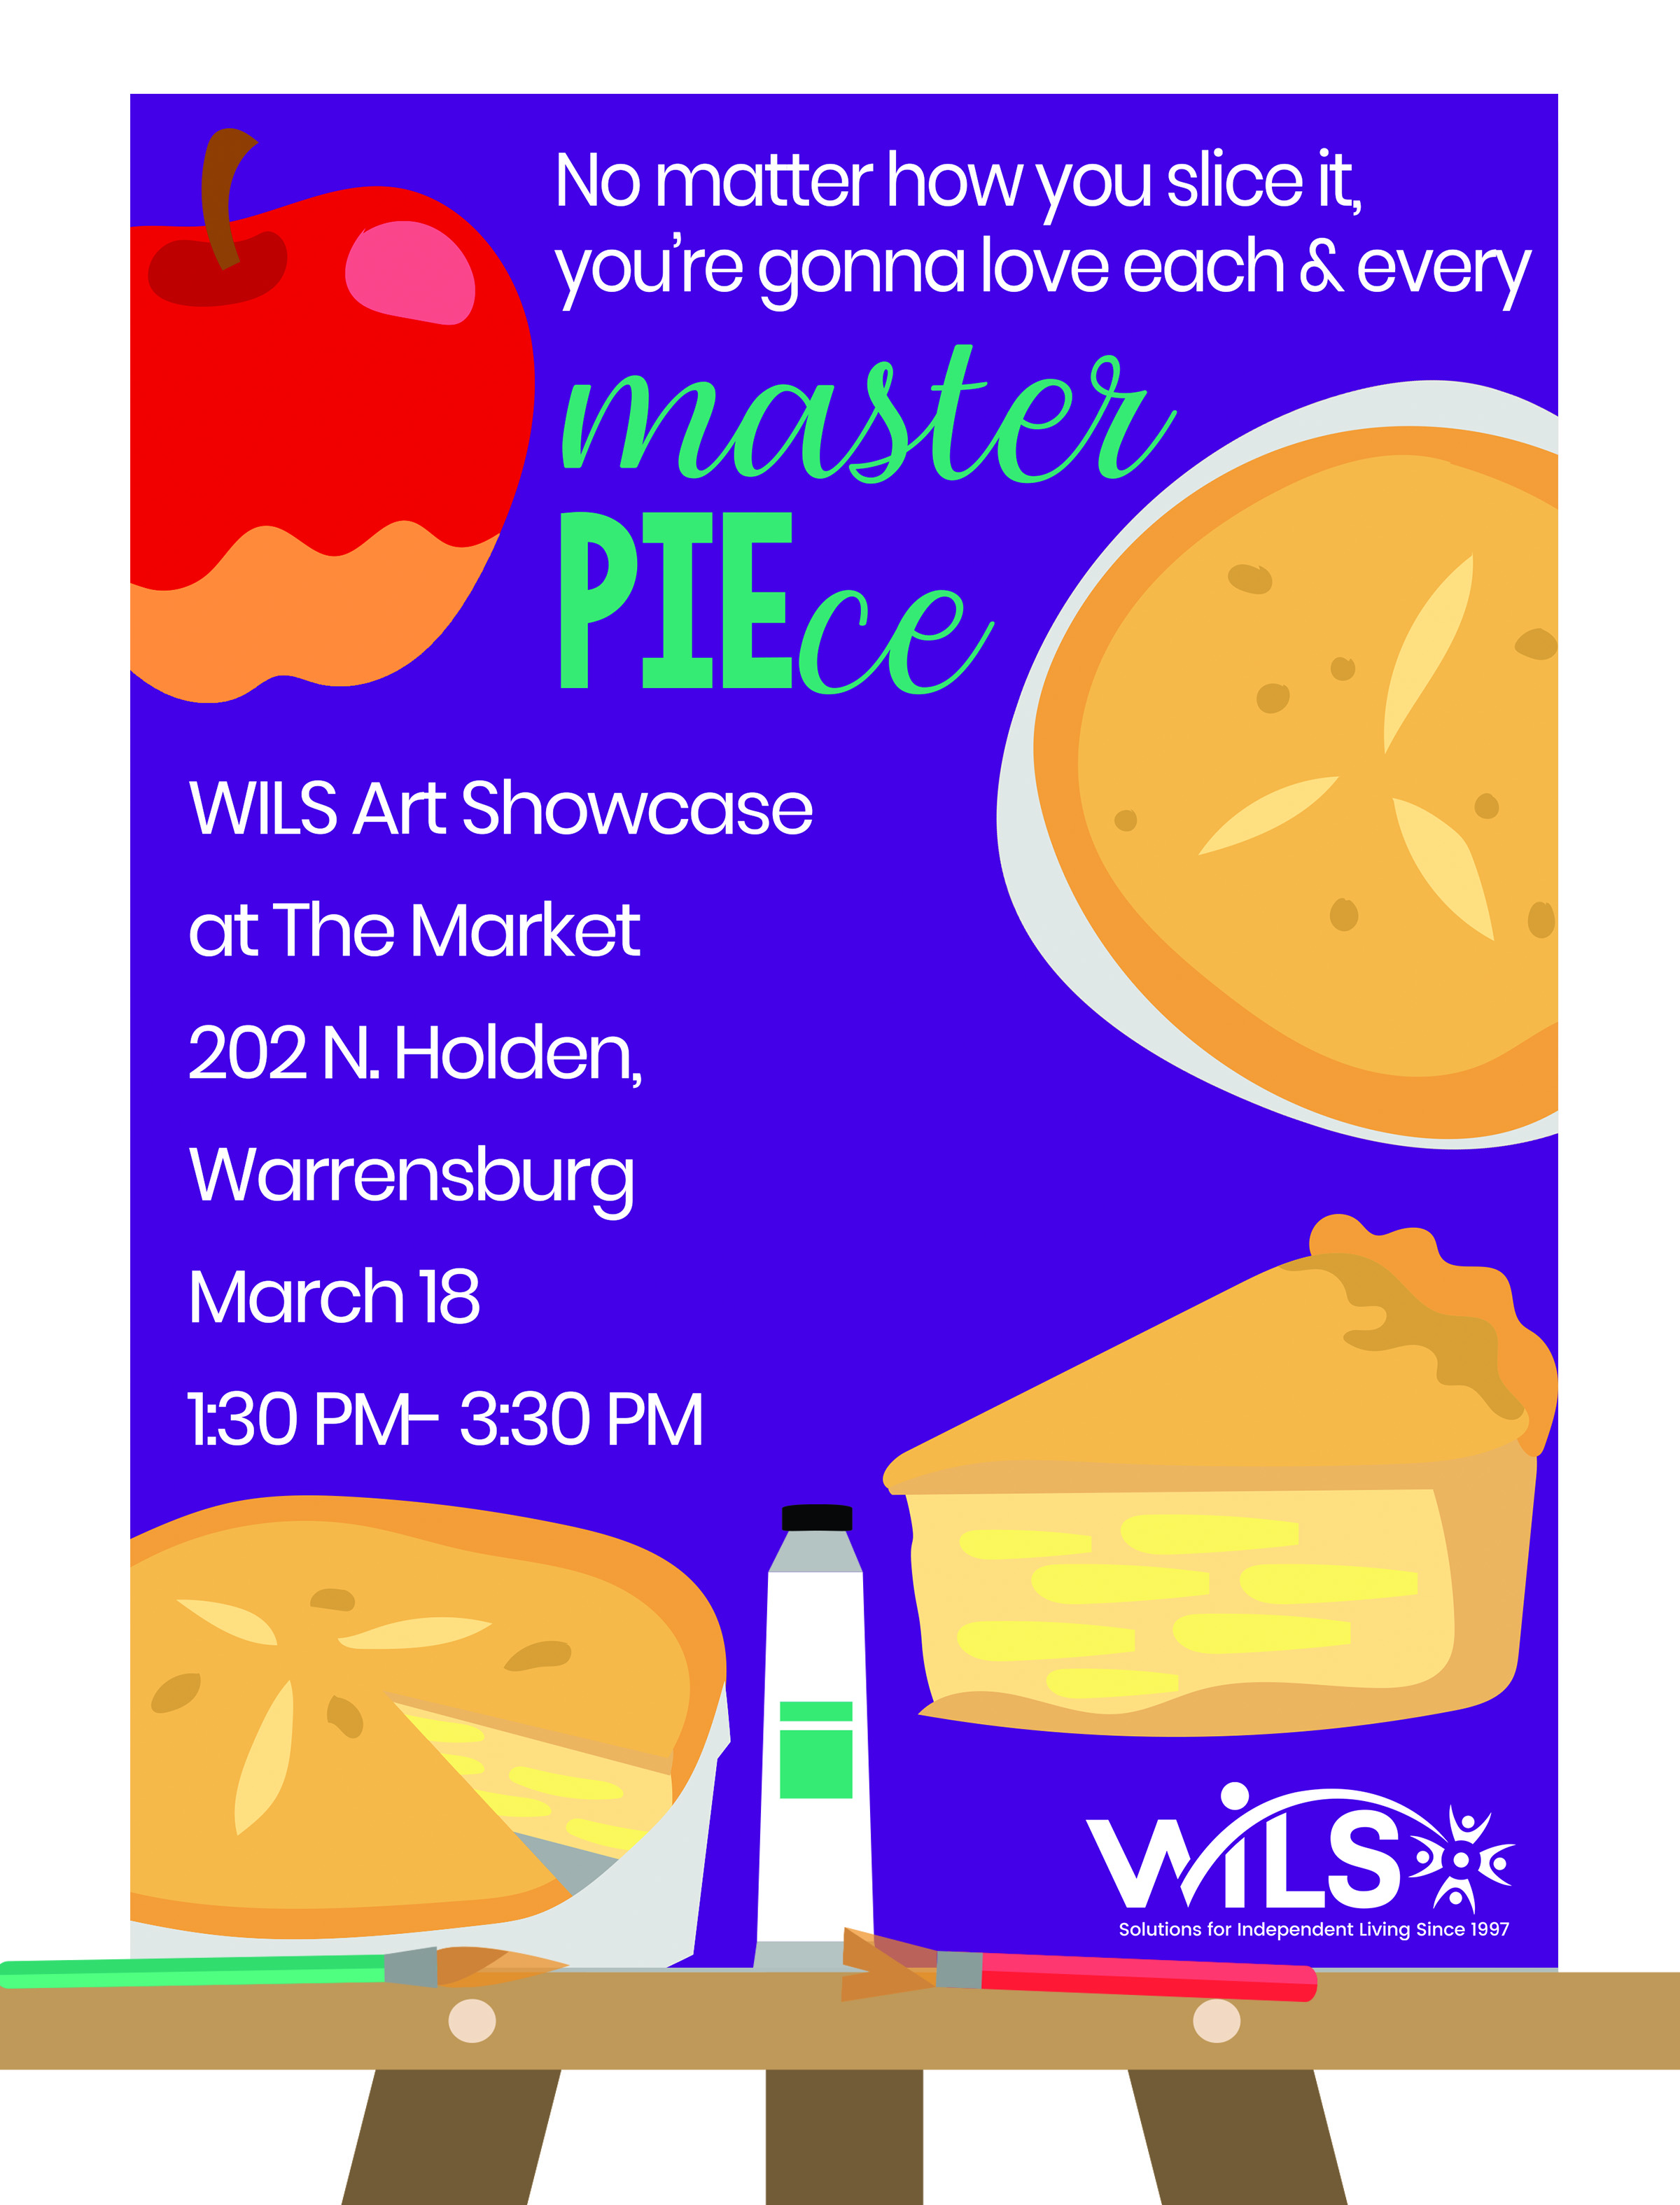 No matter how you slice it, you're gonna love each and every masterPIEce. WILS art showcase at The Market, 202 N. Holden, Warrensburg. March 18th from 1:30 om until 3:30pm